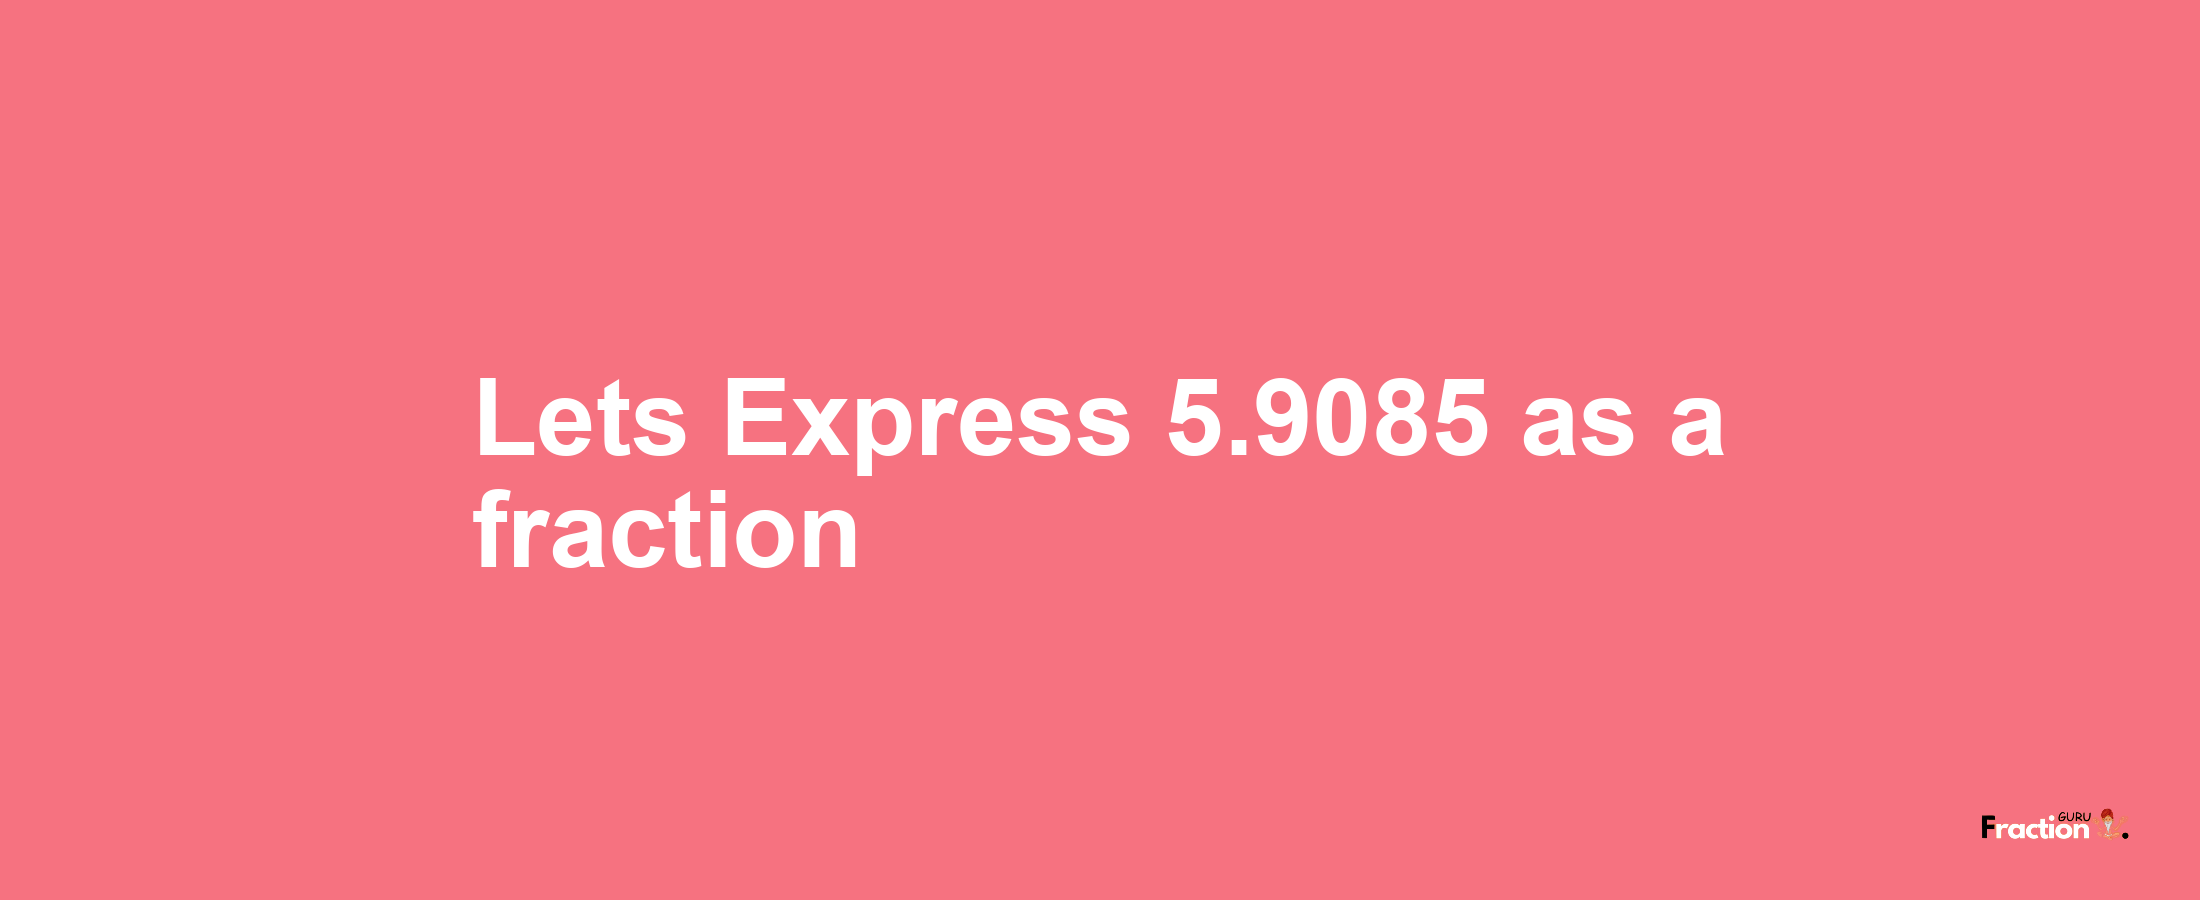 Lets Express 5.9085 as afraction